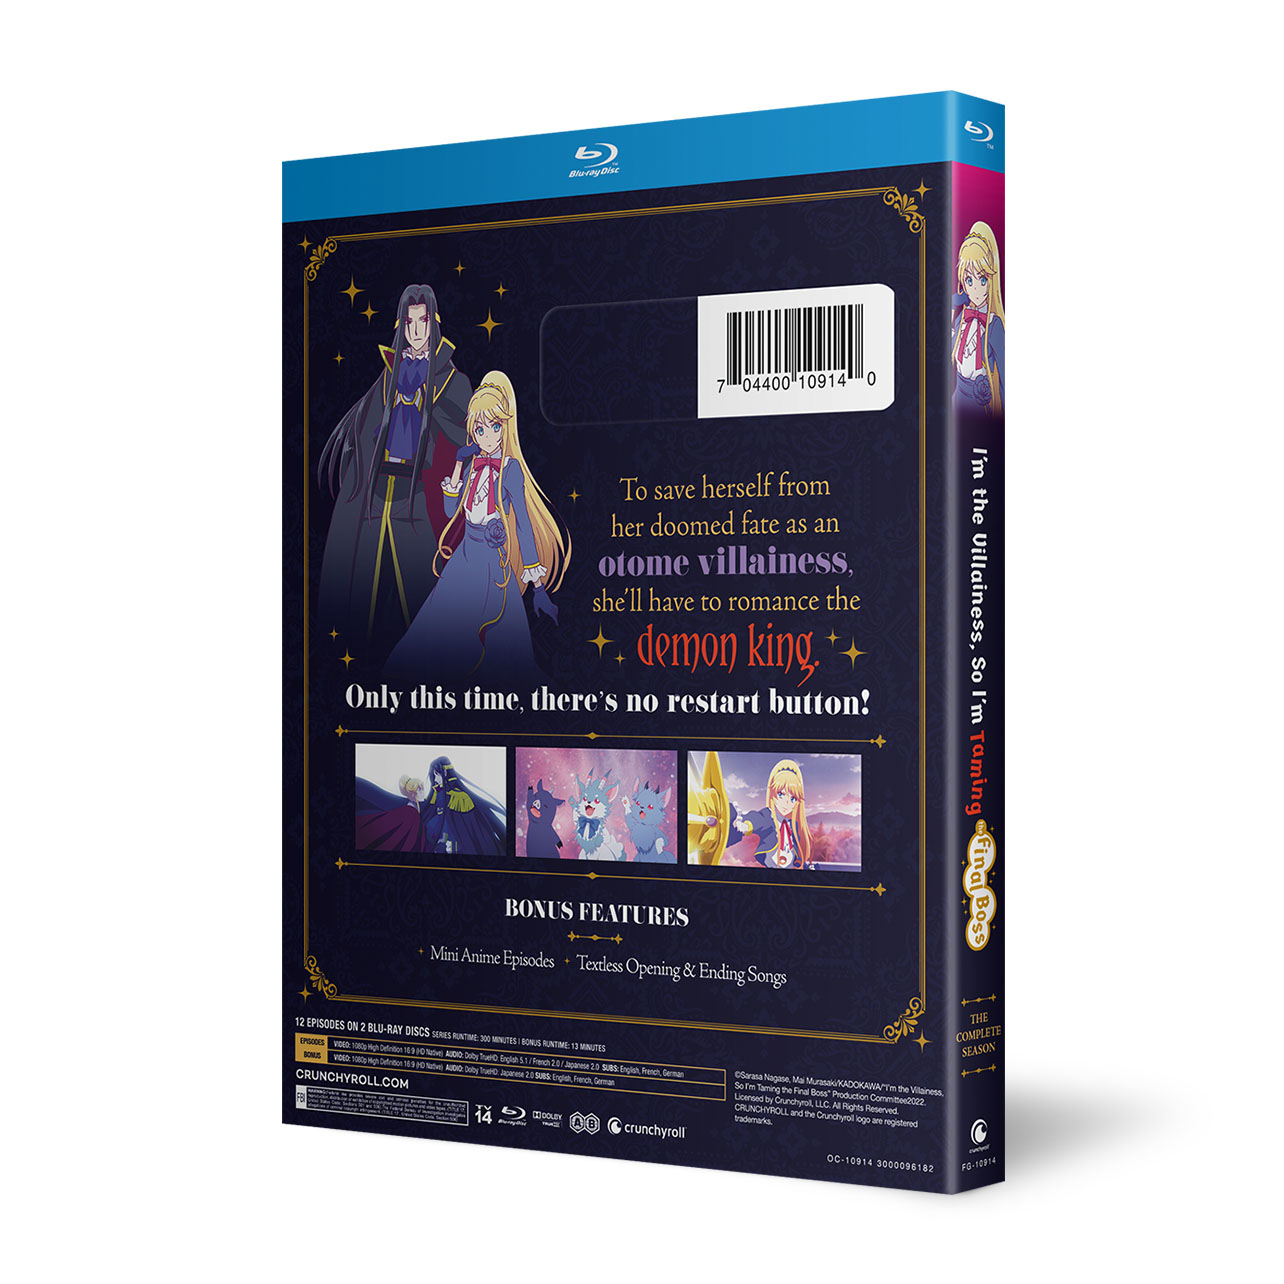 I'm the Villainess, So I'm Taming the Final Boss - The Complete Season - Blu-ray image count 2